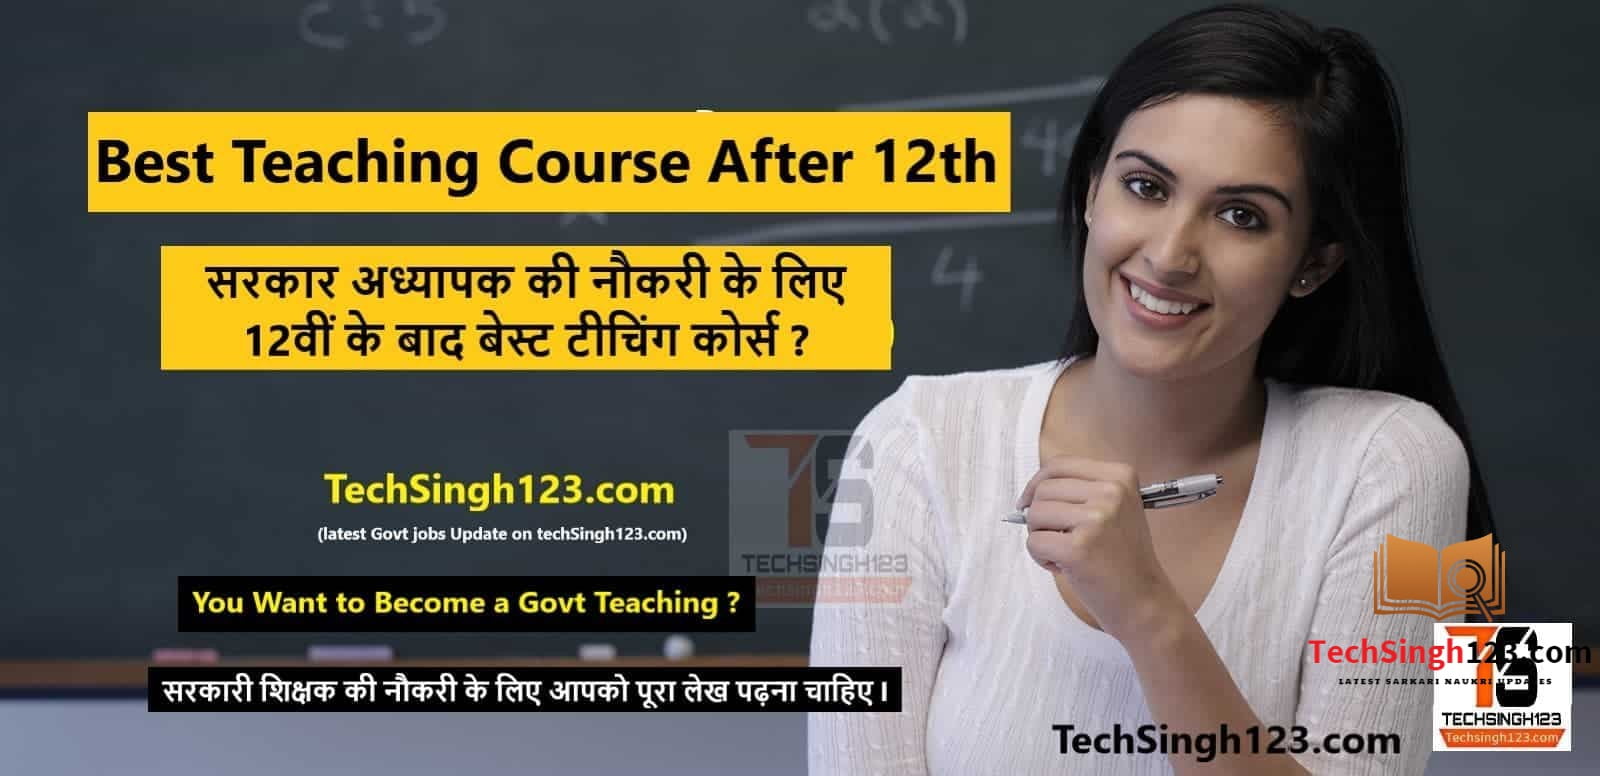 Best Teaching Course After 12th 